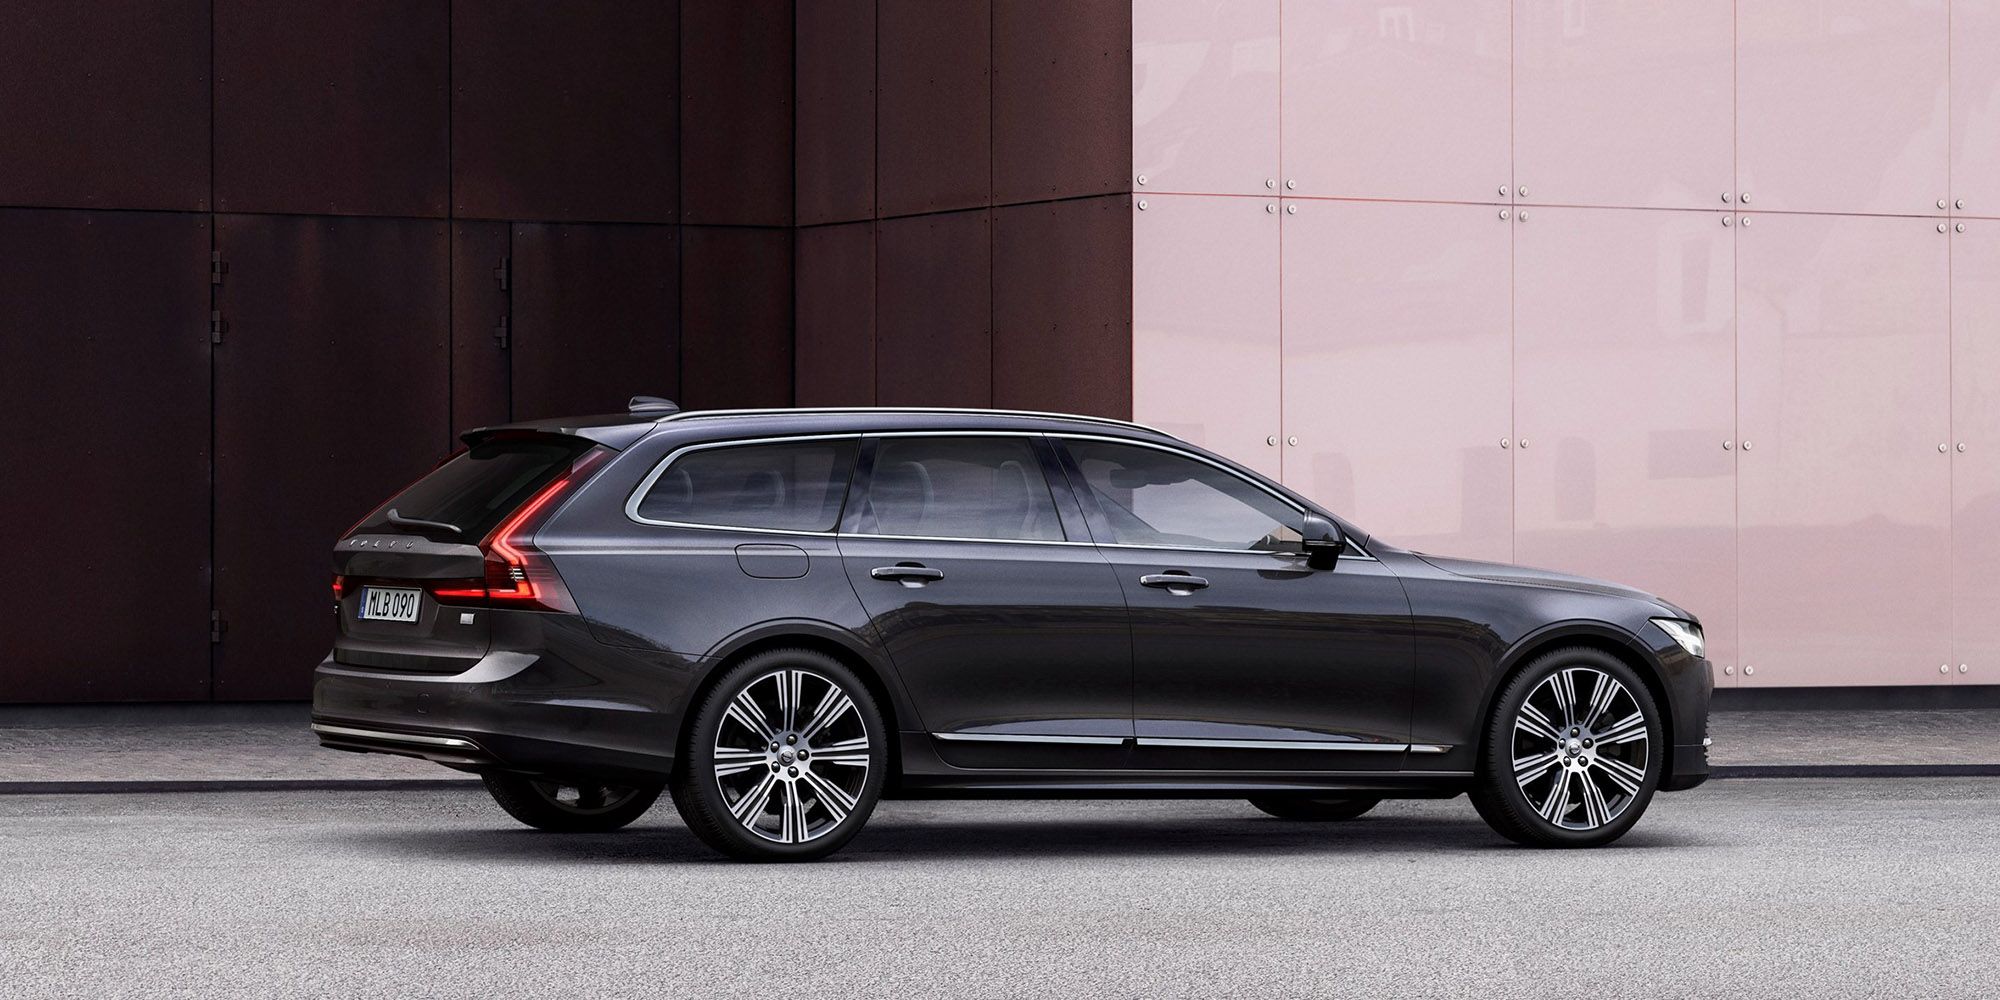 Rear 3/4 view of the V90